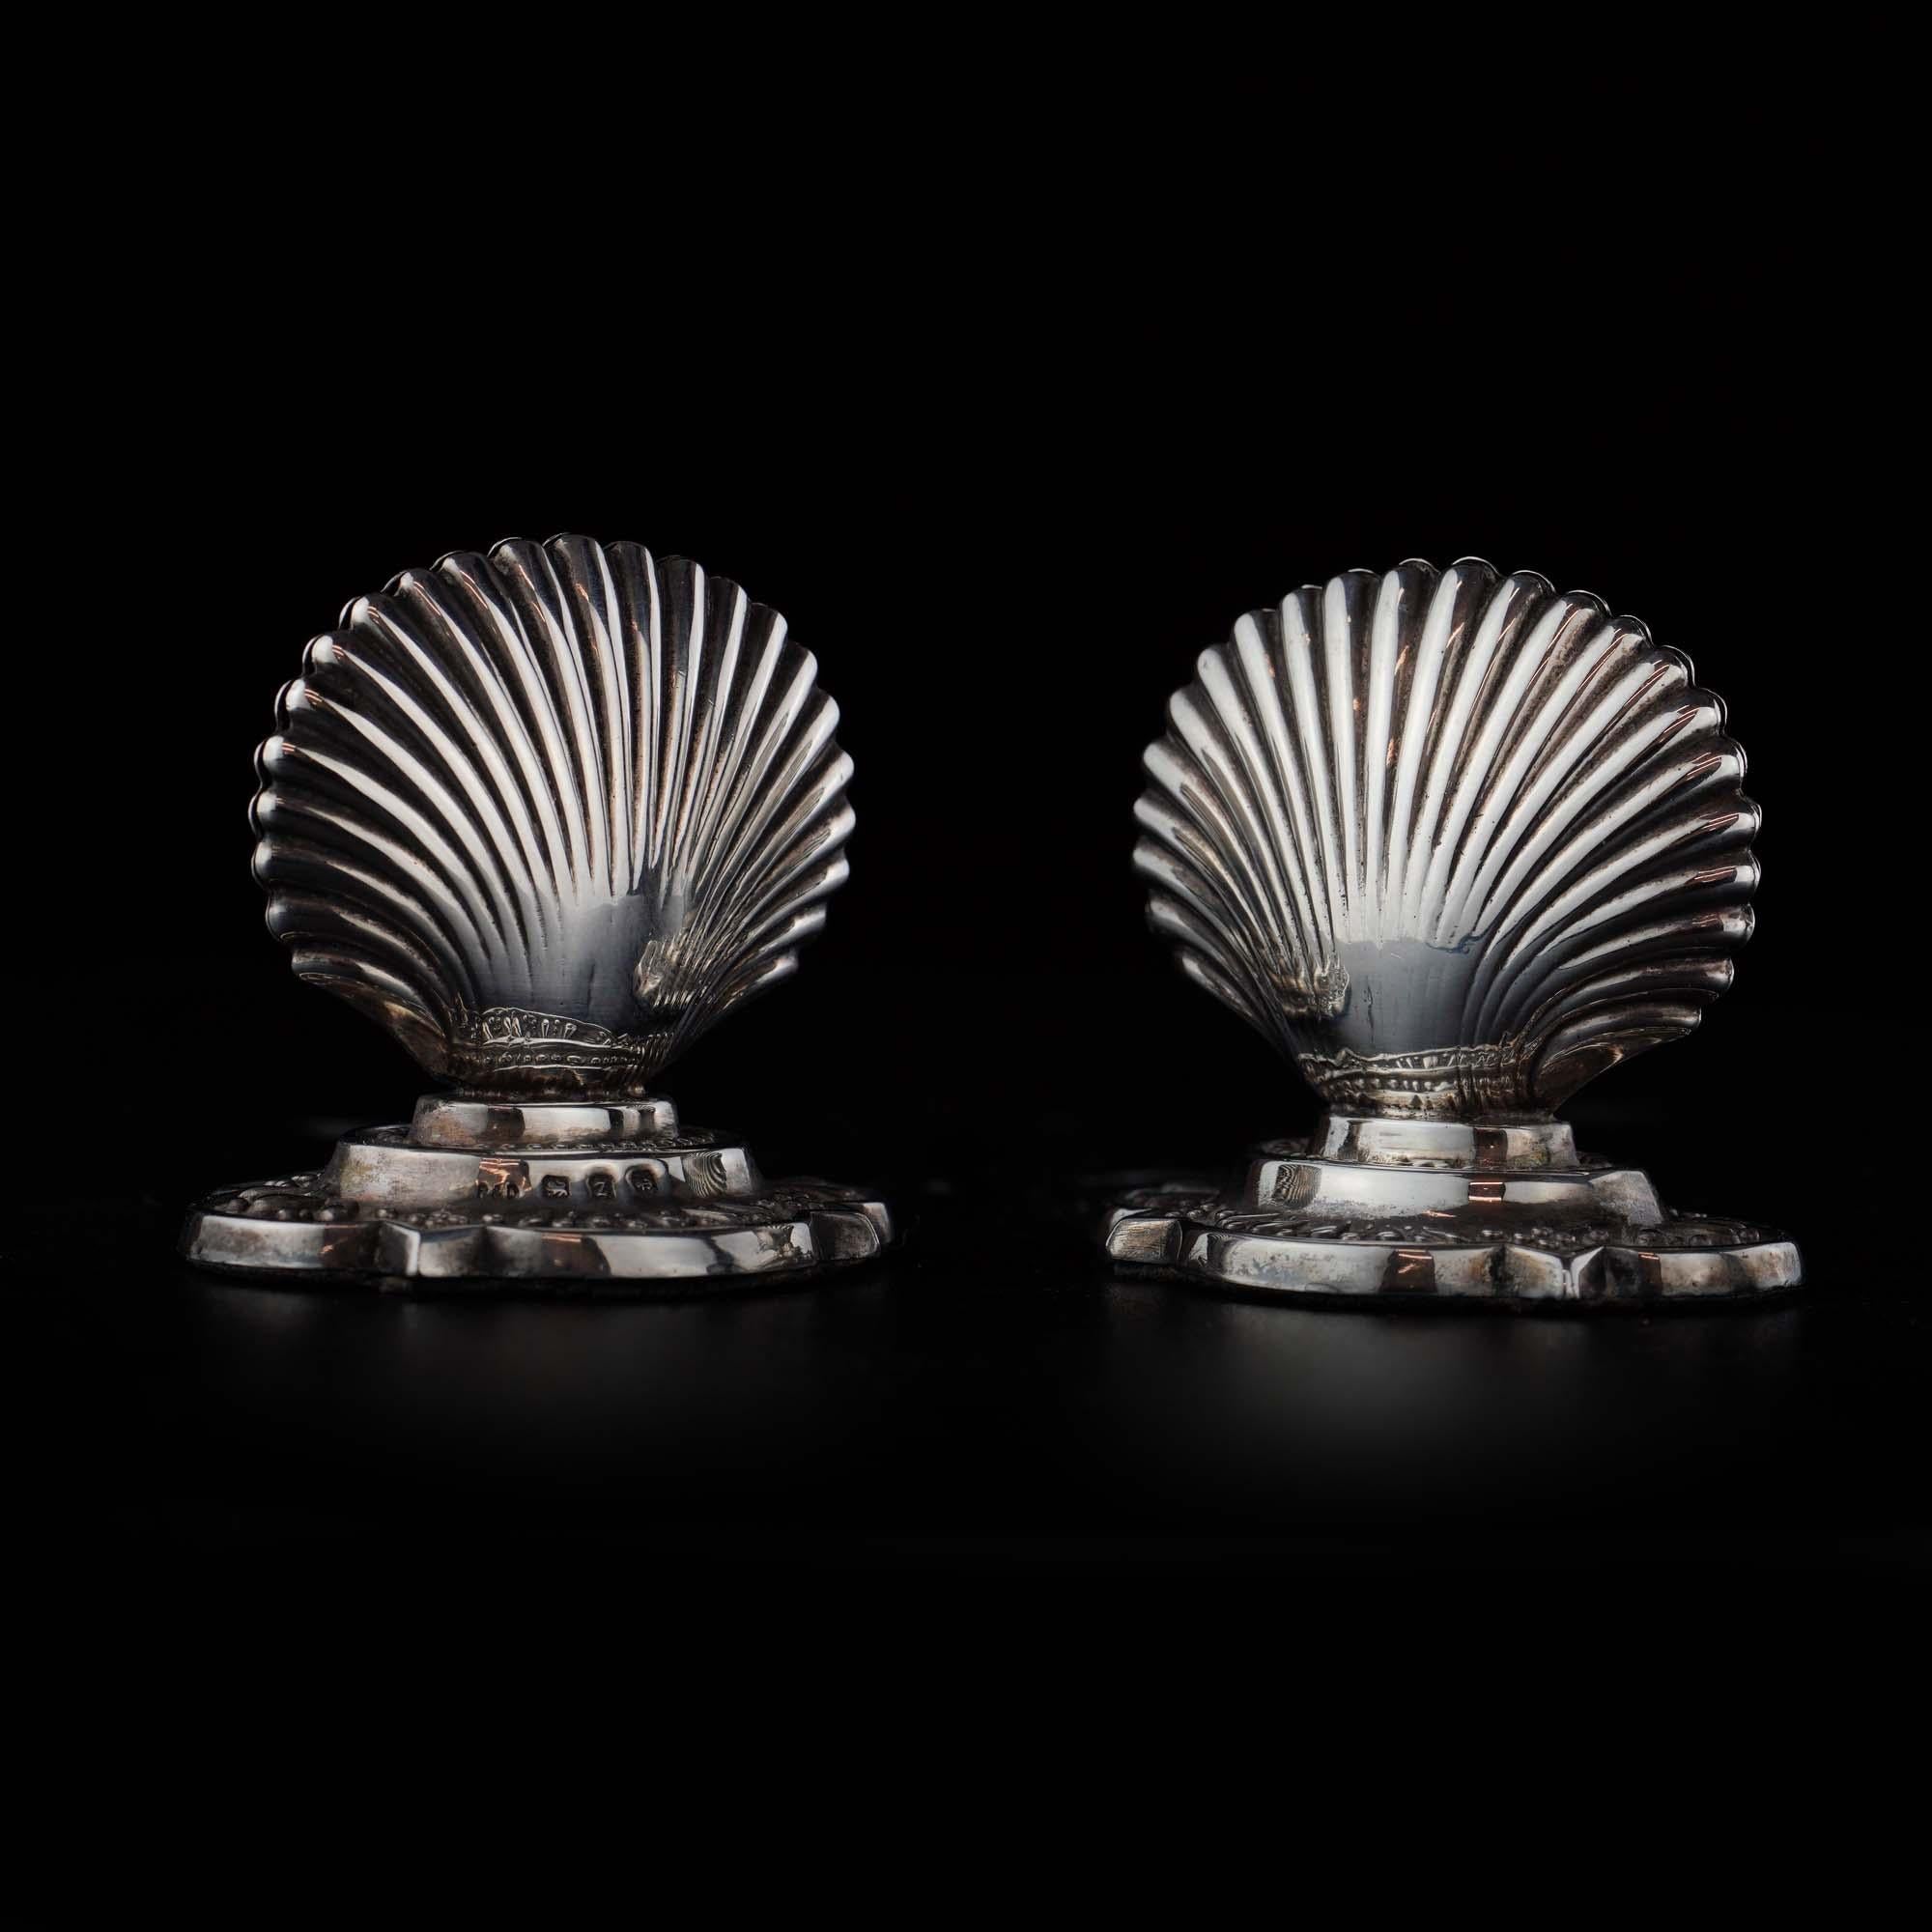 Antique late Victorian sterling silver small shell menu holders
Maker: Pembrook & Dickins
Made in England, Birmingham, 1899
Fully hallmarked.

Approx. dimensions :
Length width x height: 4.4 x 3.5 x 4 cm
Total weight: 46 grams

Condition: